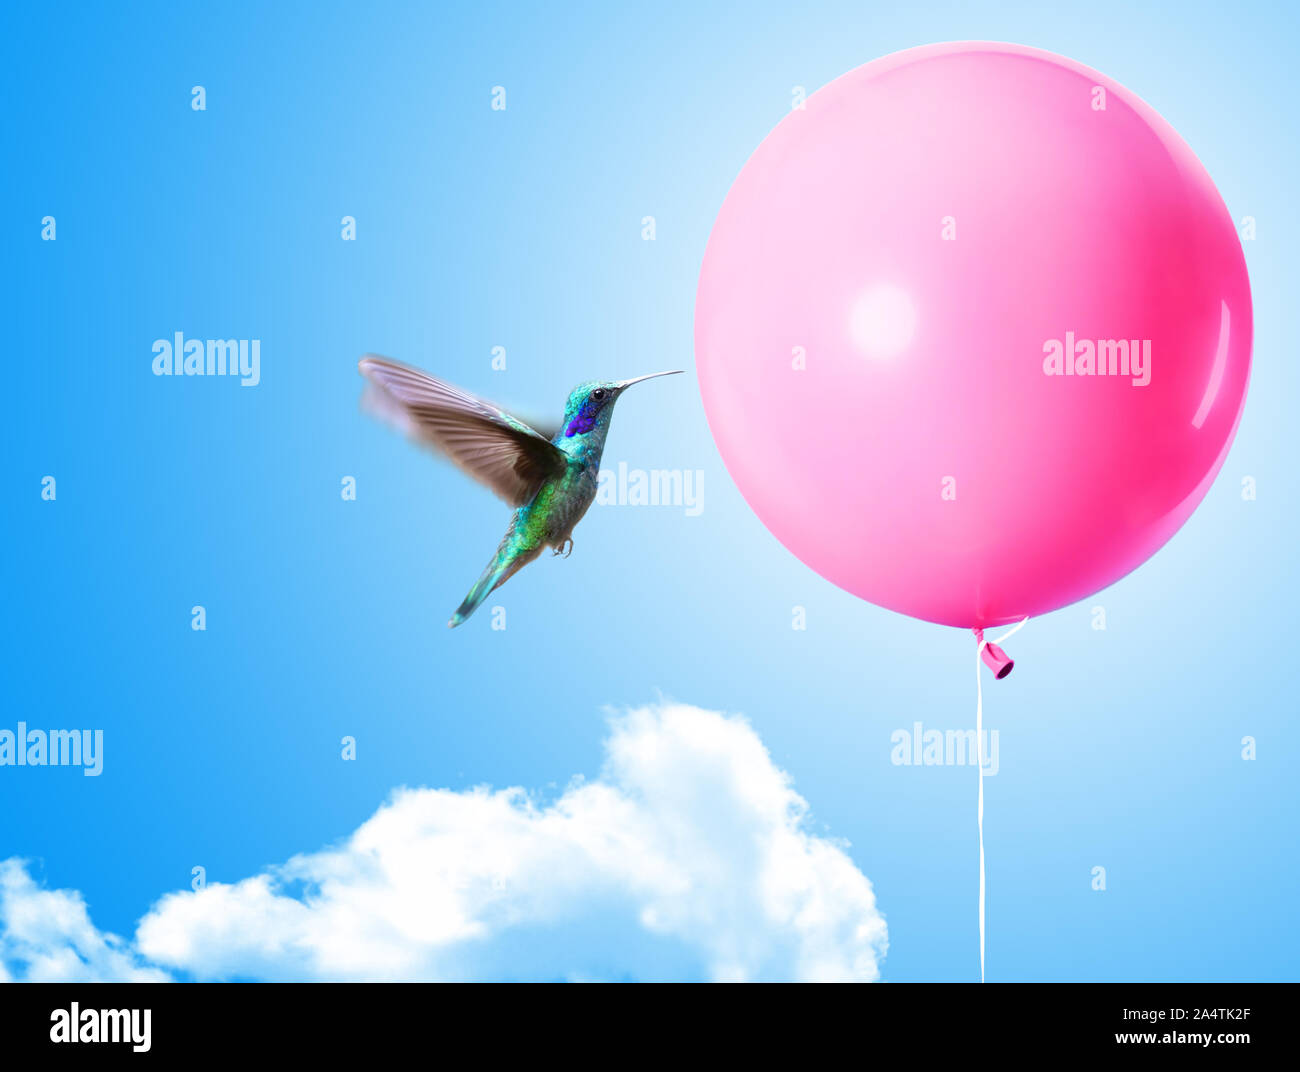 A hummingbird is about to pop a balloon. Stock Photo